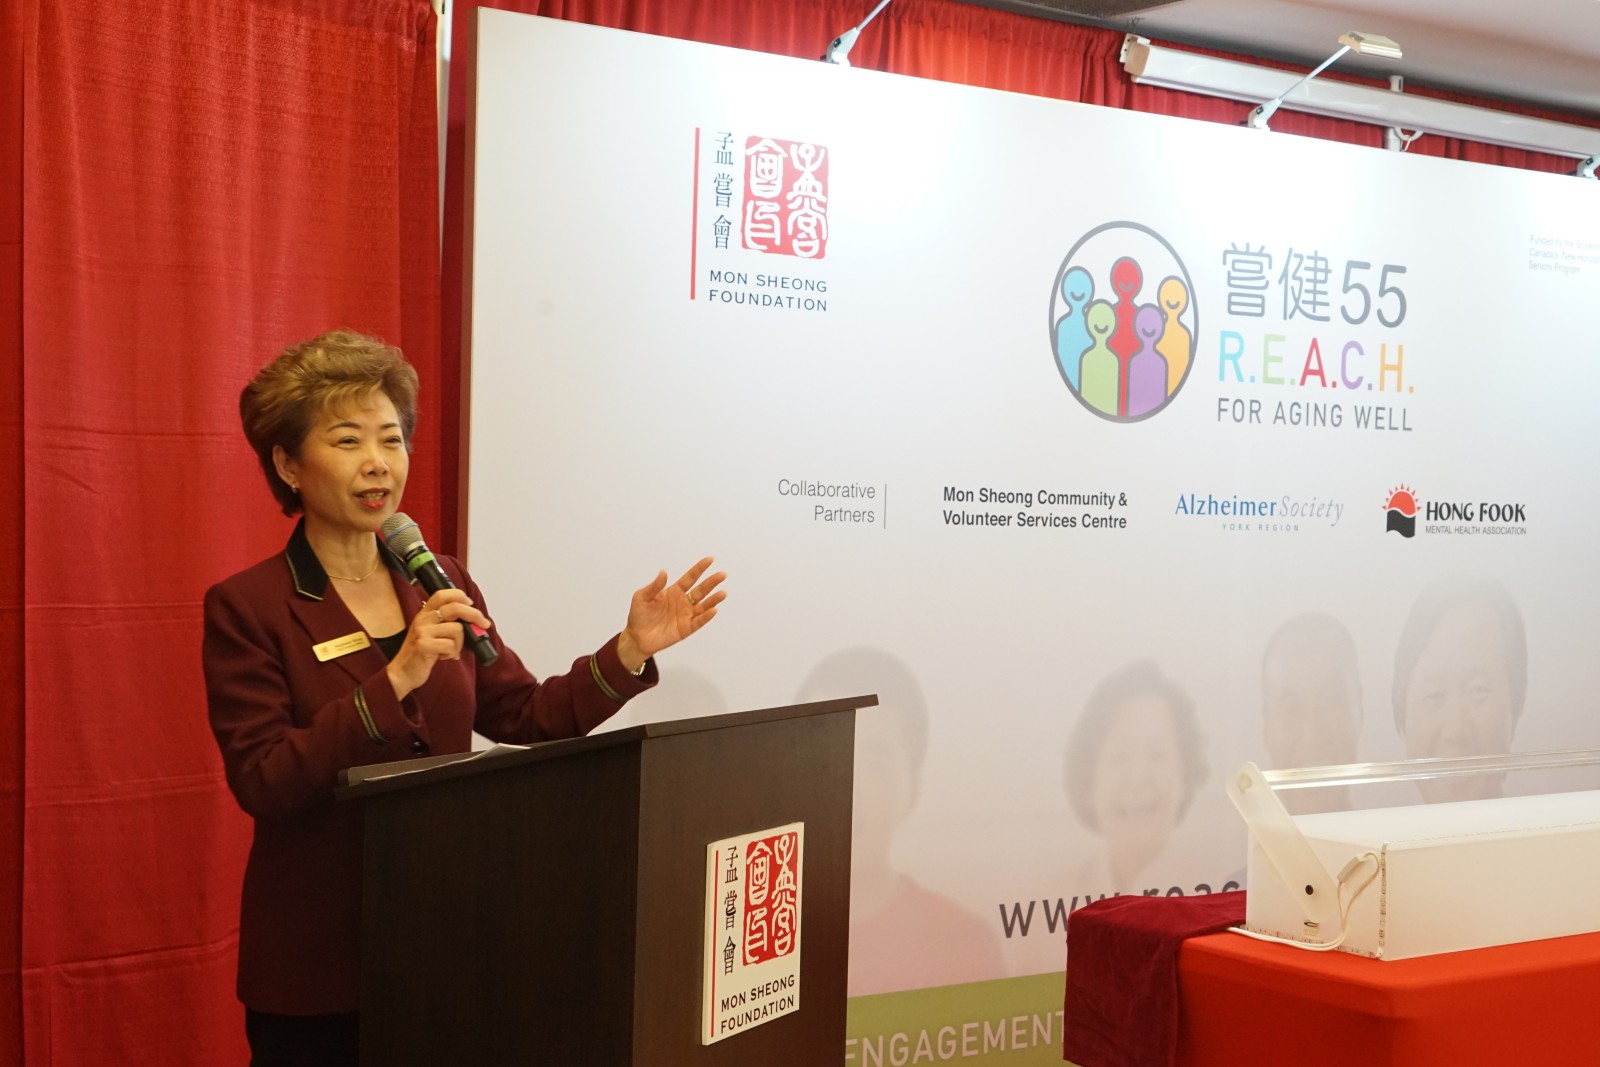 Stephanie Wong, CEO of Mon Sheong Foundation, giving a thank you remarks